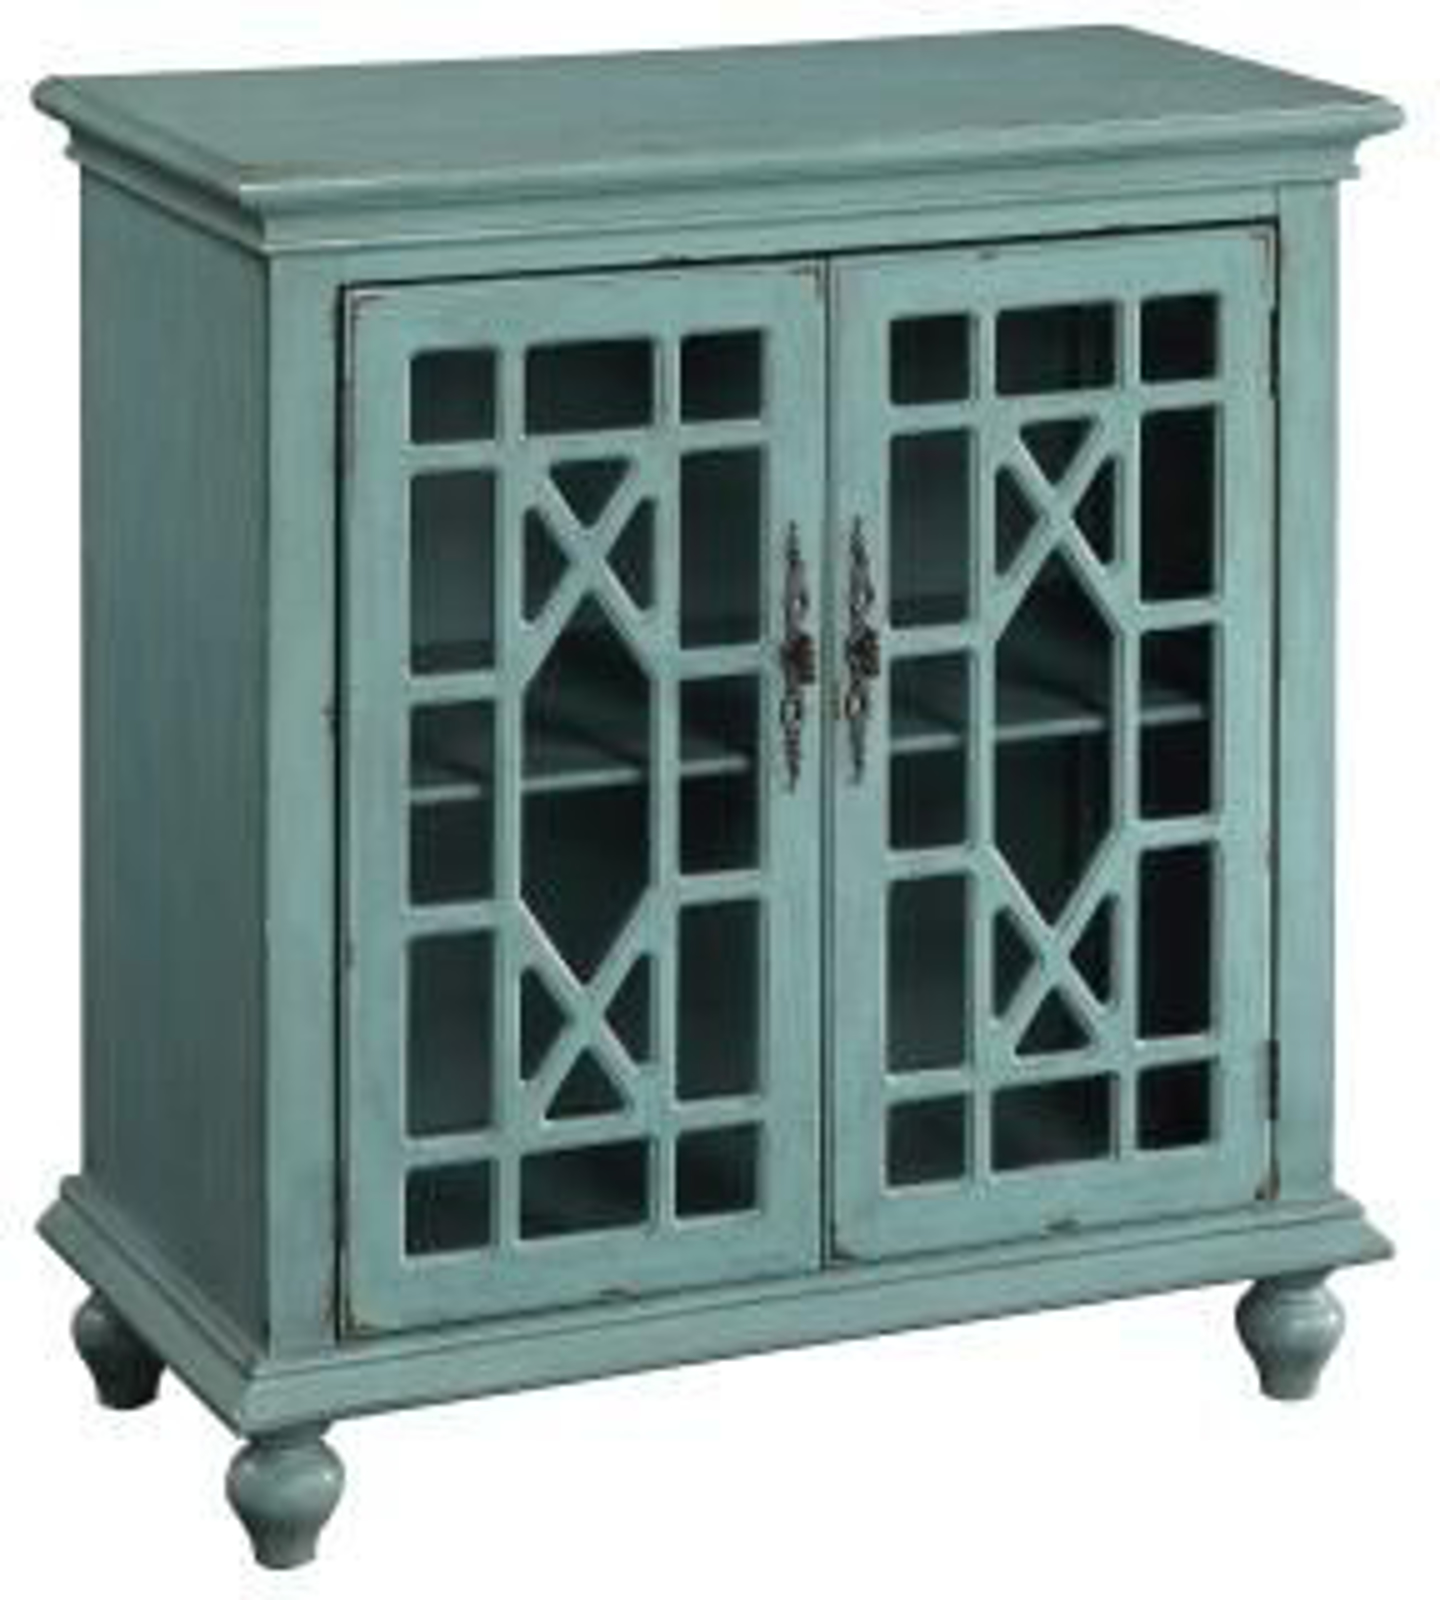 Picture of Cramco Two Door Cabinet, Blue